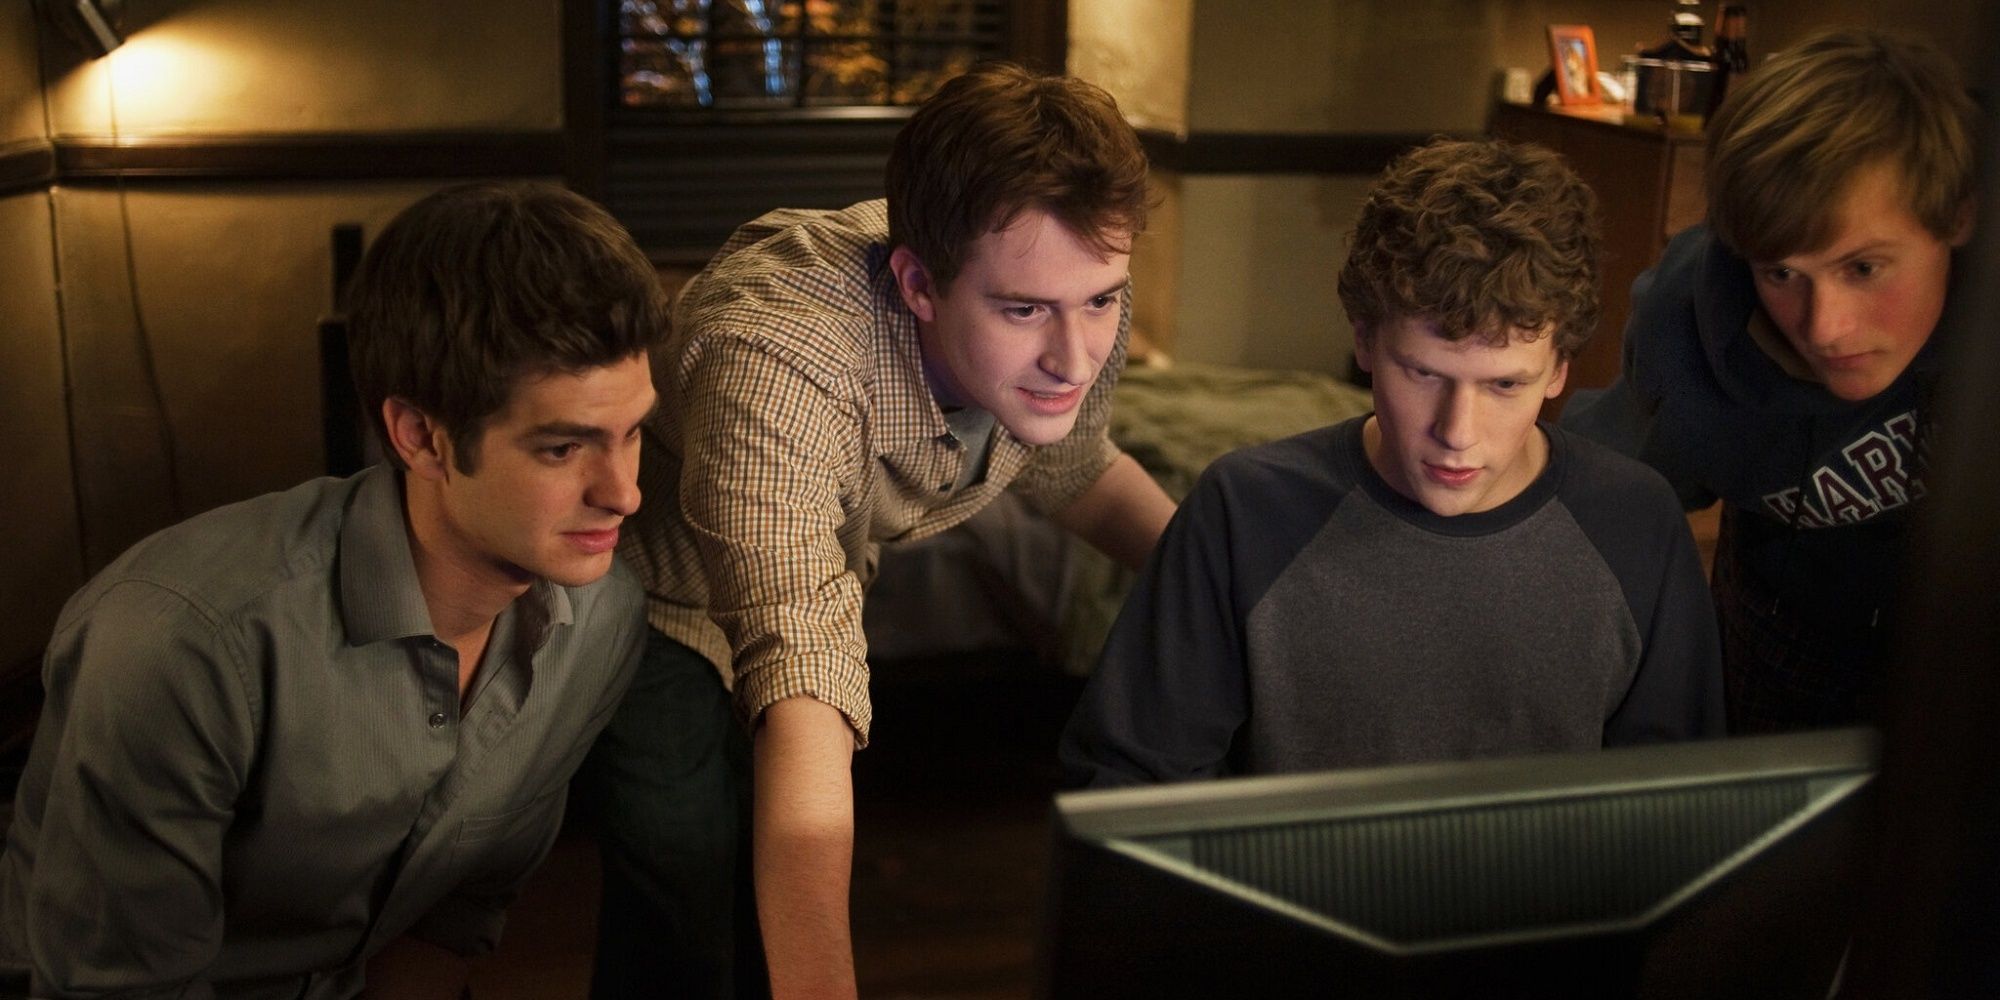 Jesse Eisenberg as Mark Zuckerberg, and his friends, surrounding a computer in The Social Network.